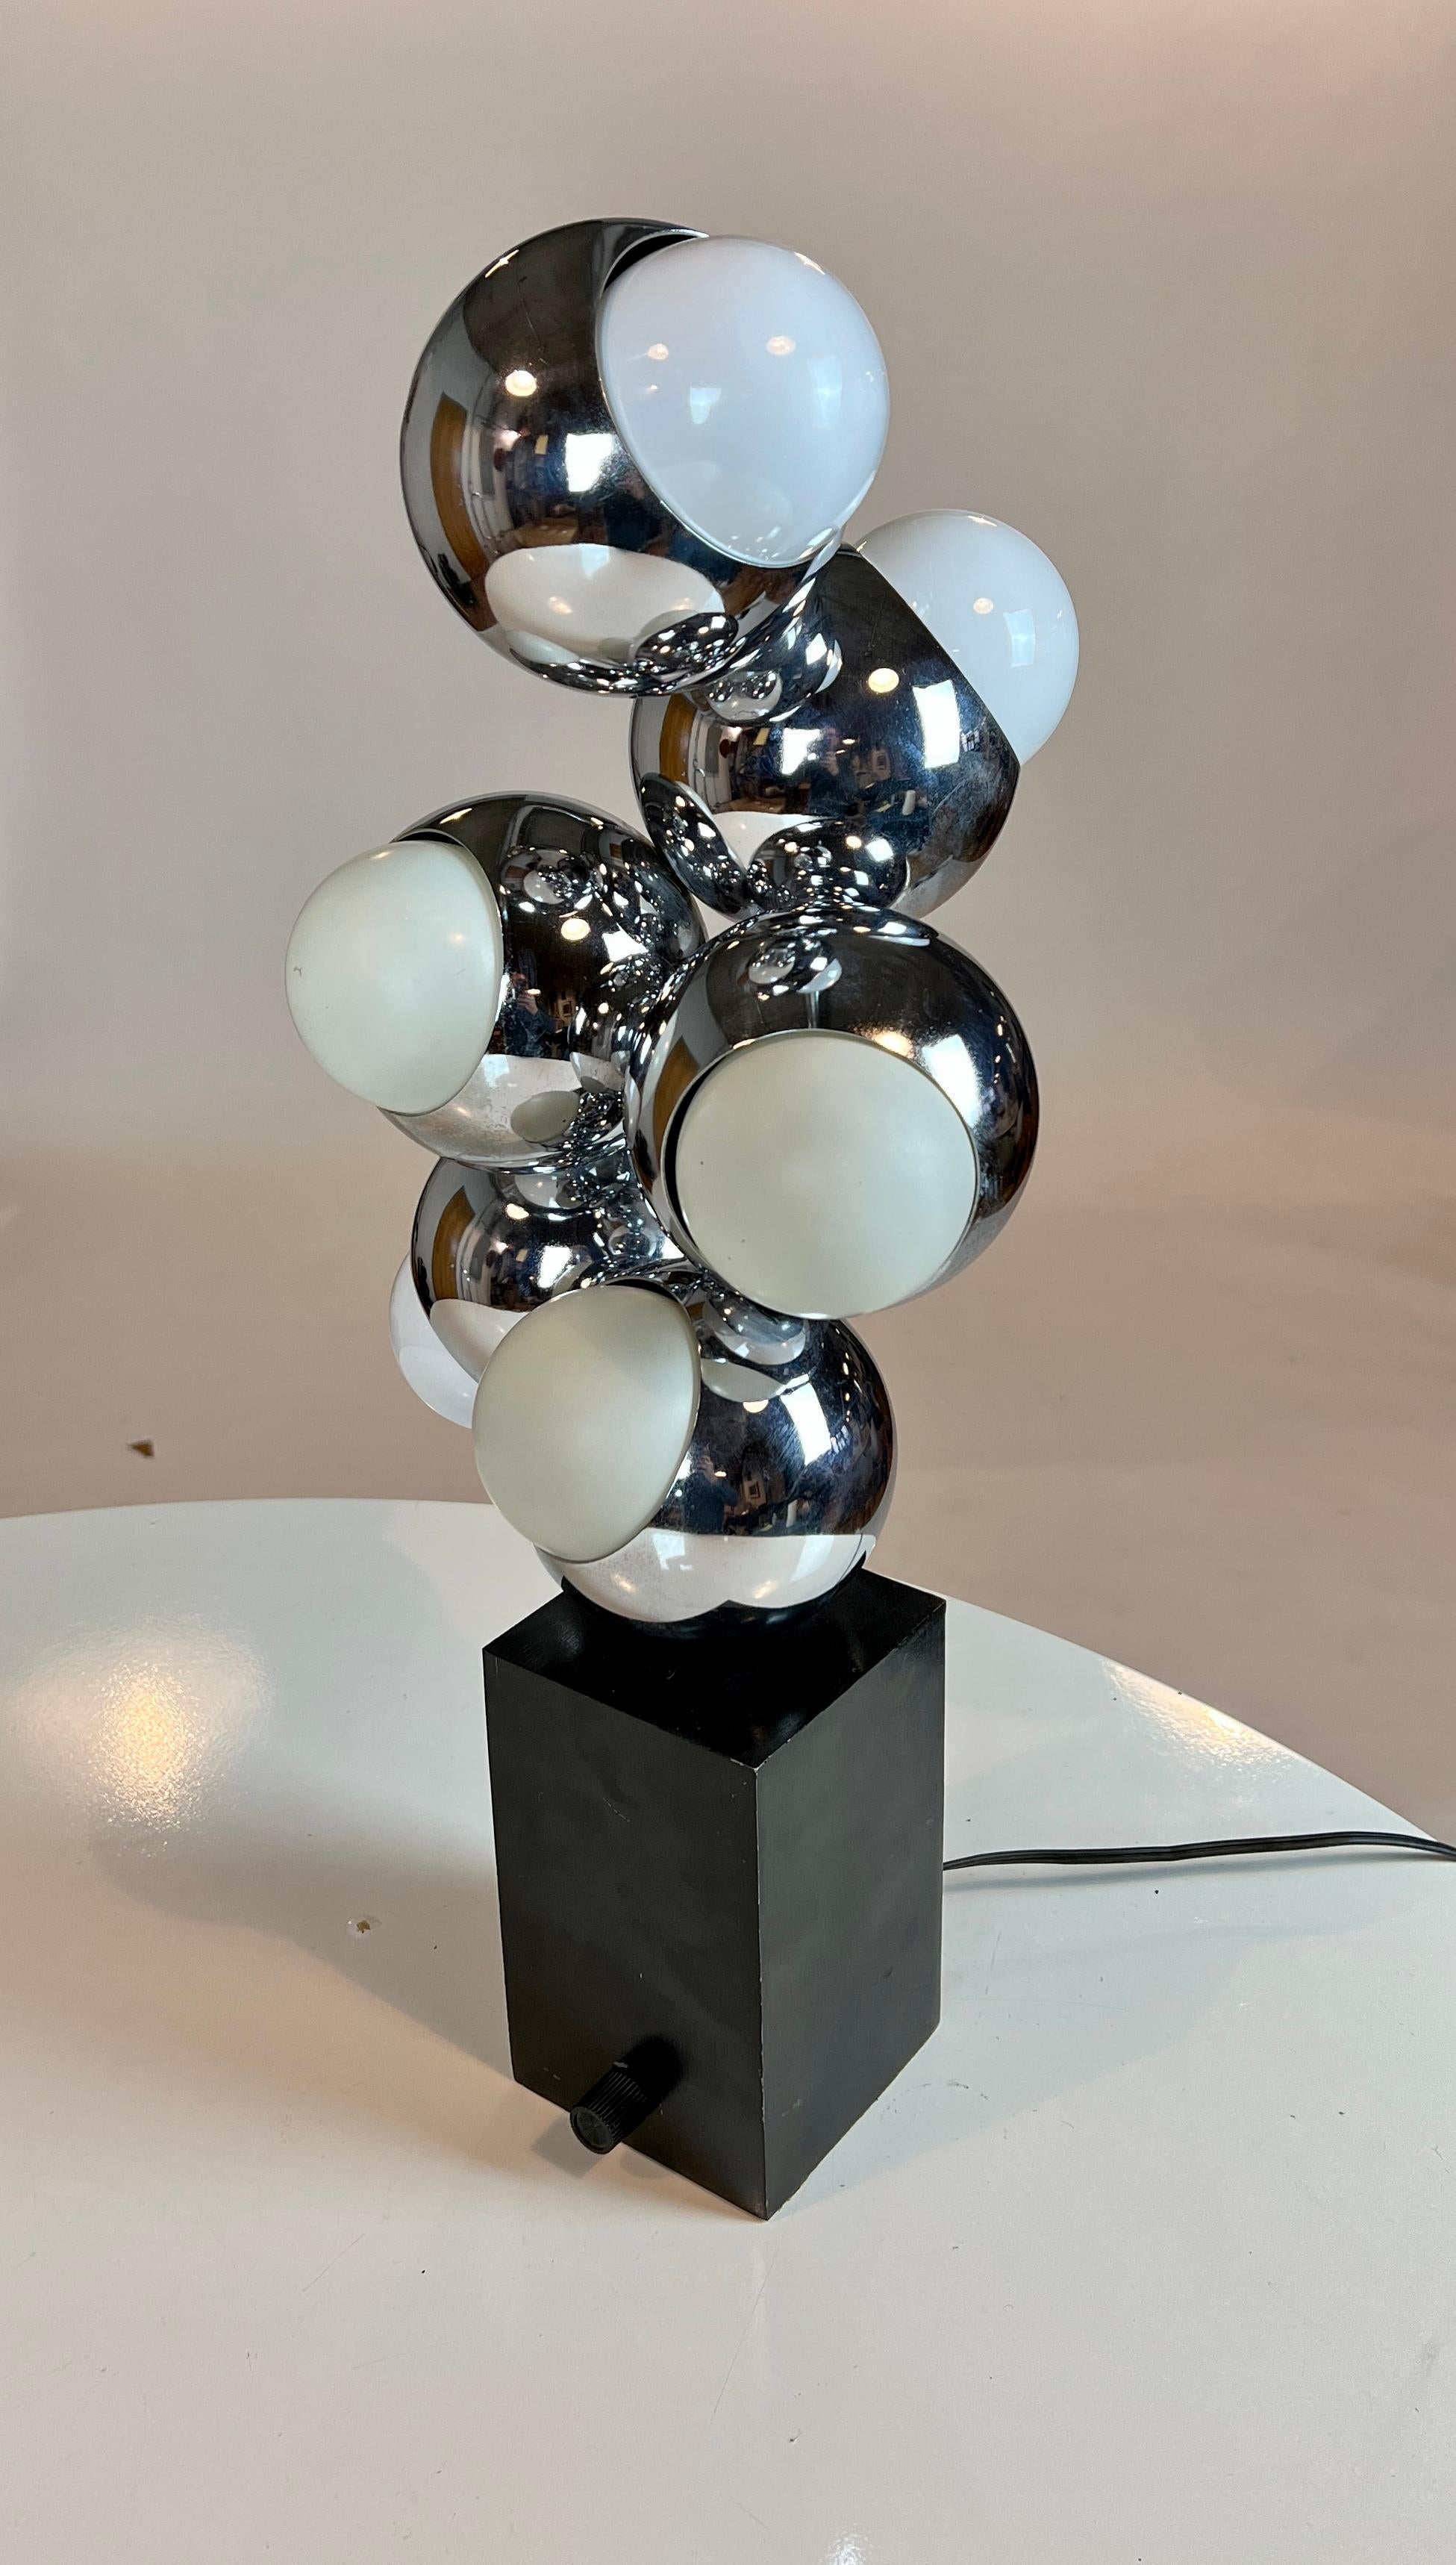 Space age vintage molecule or sputnik design table lamp in polished chrome on a black plinth with a dimmer knob. All sockets tested and in good working condition.
  